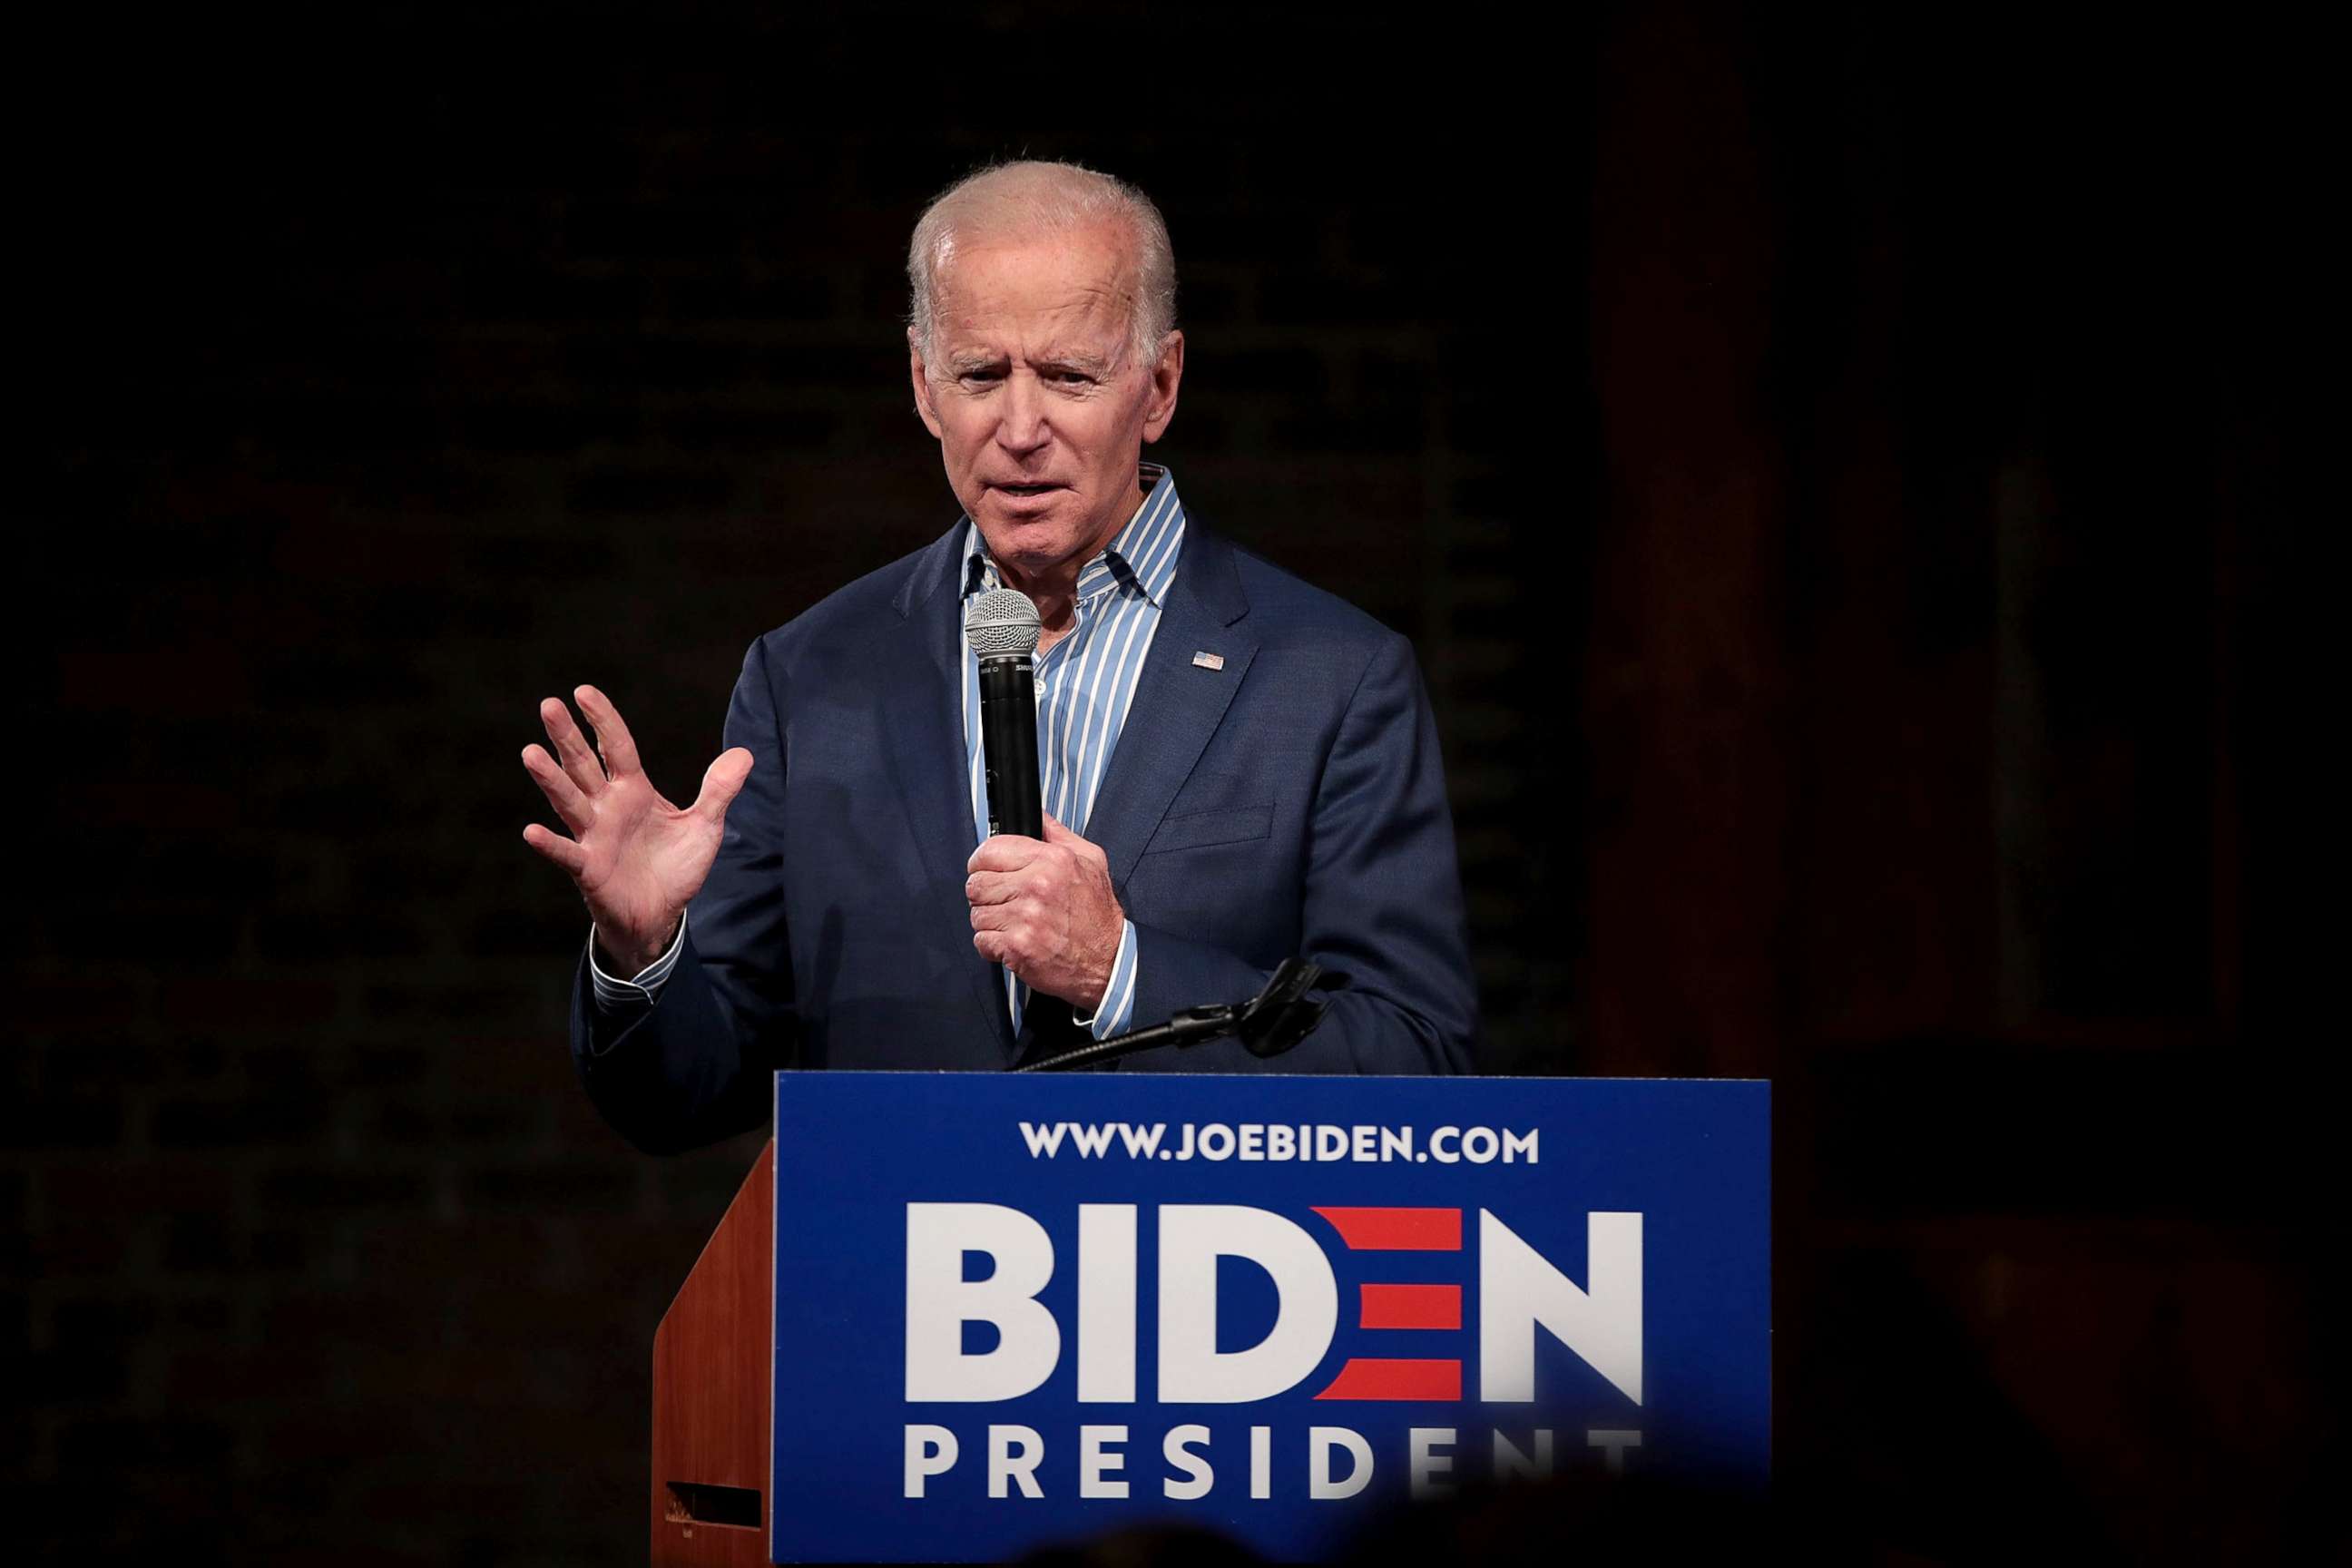 PHOTO: Democratic presidential candidate and former vice president Joe Biden speaks to guests during a campaign event at The River Center, May 1, 2019, in Des Moines, Iowa.